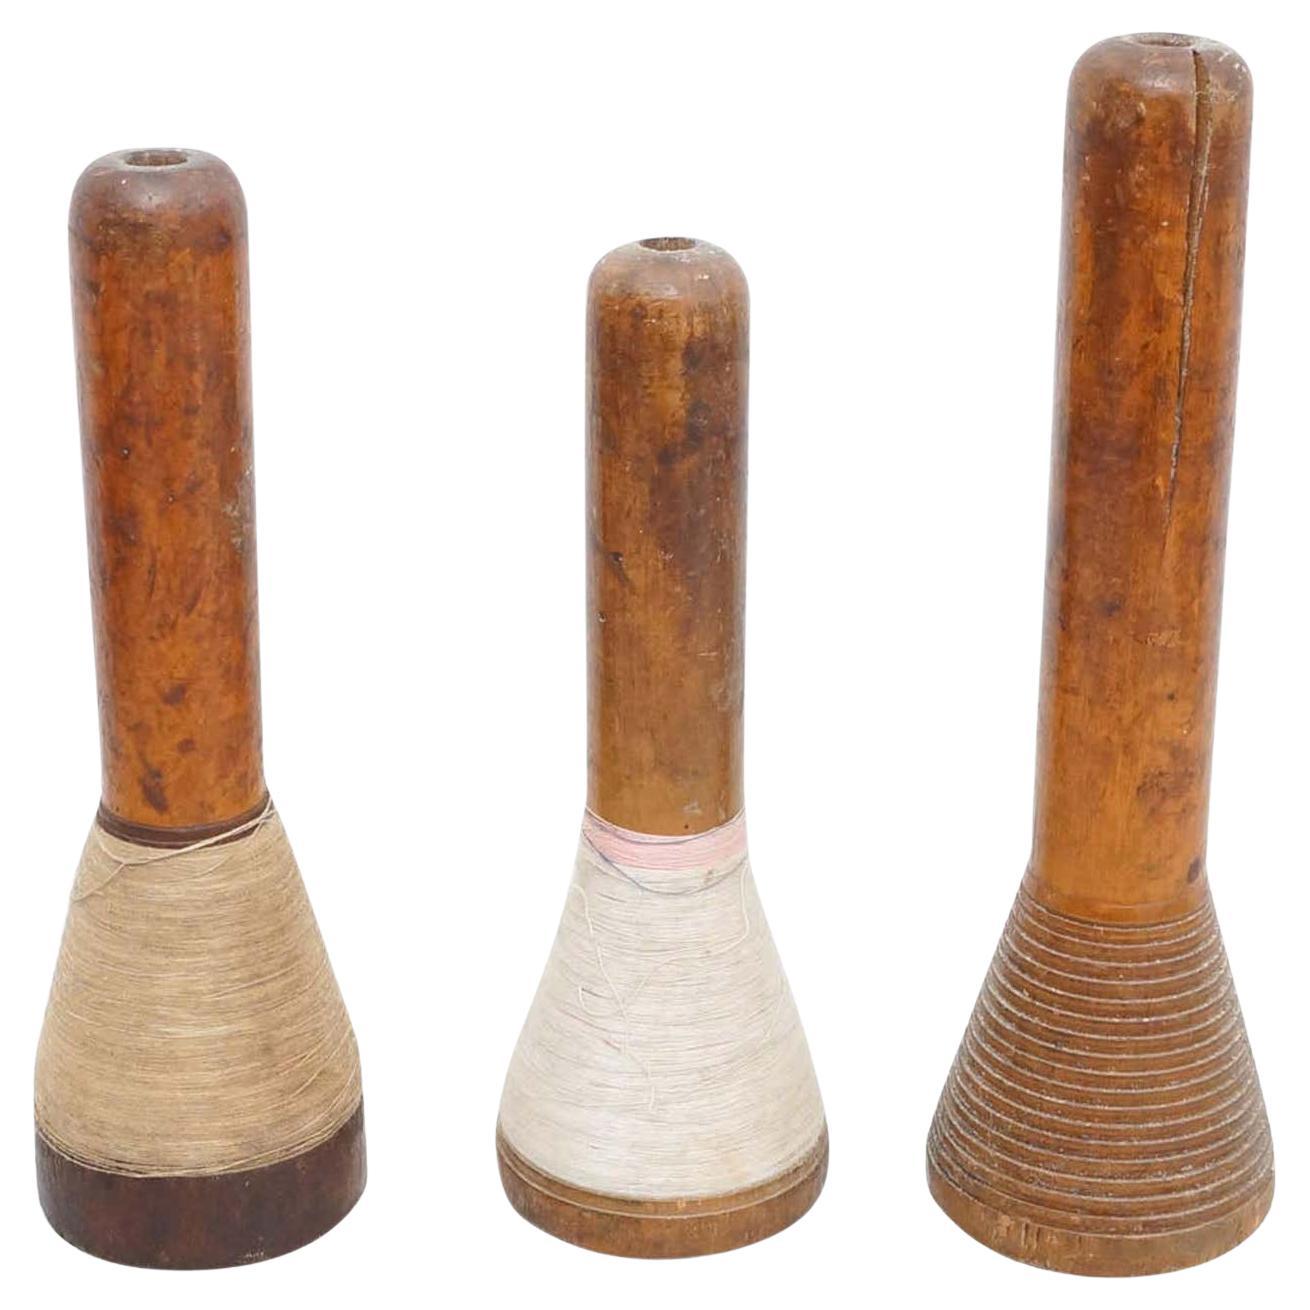 Set of Three Rustic Wooden Spools of Thread, circa 1930 For Sale